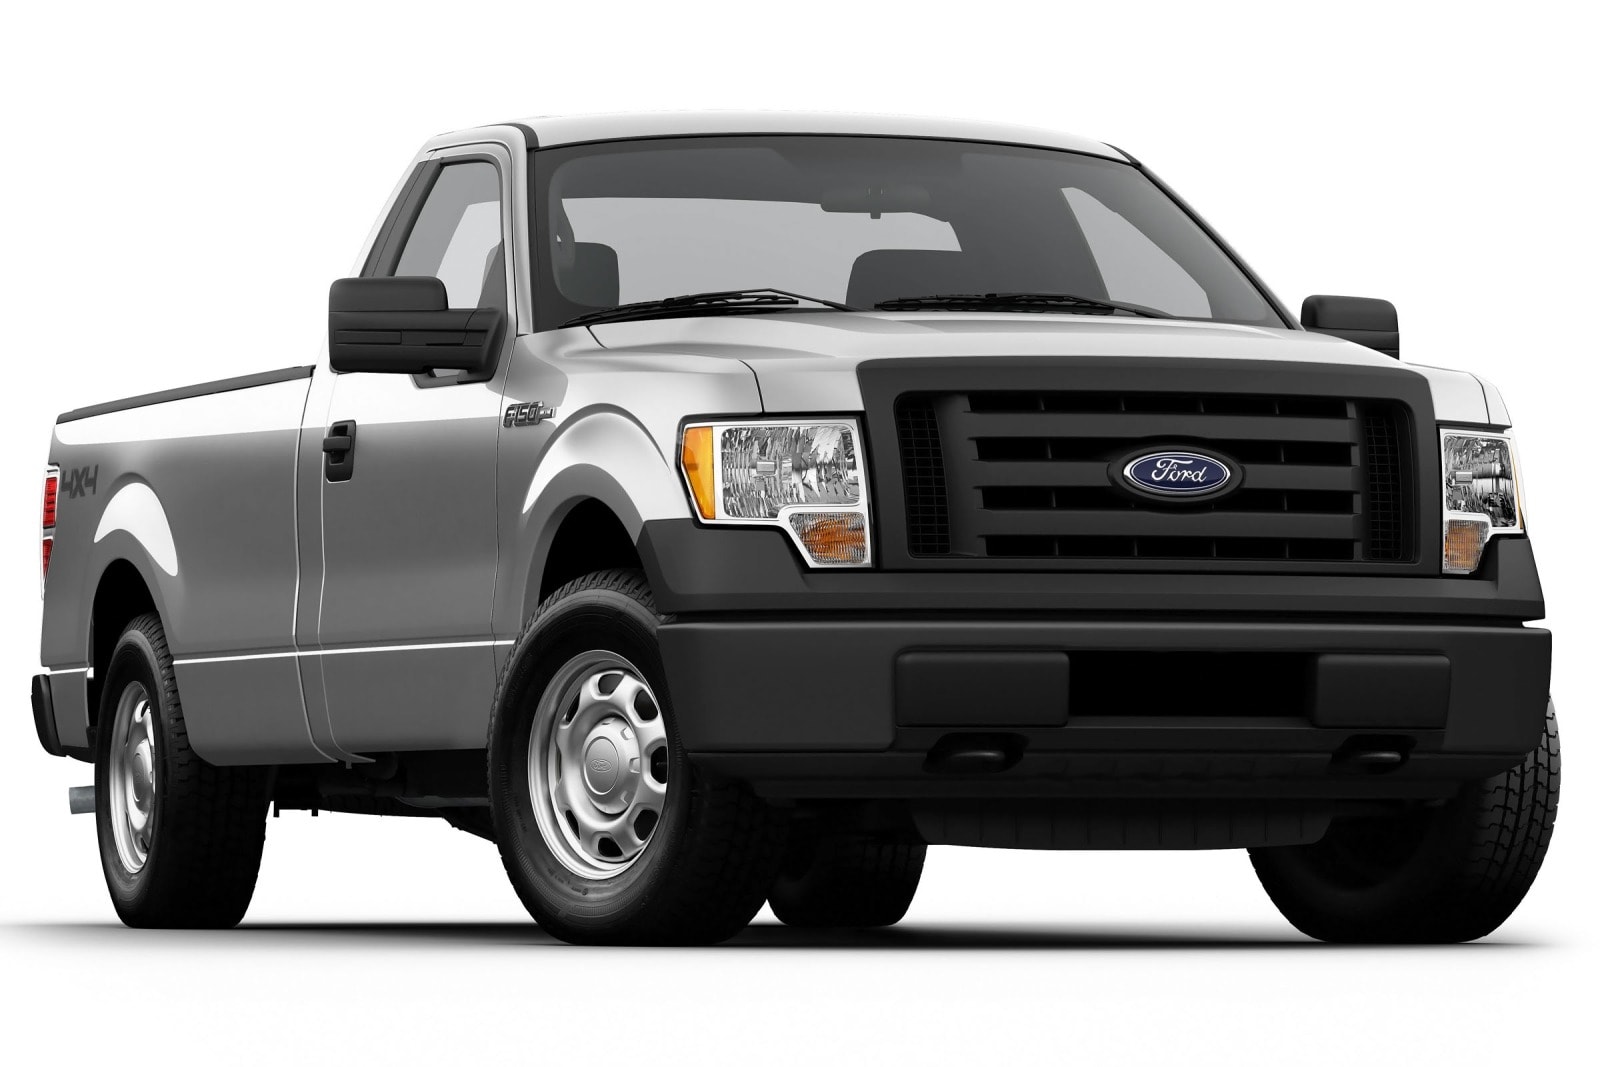 Used 2013 Ford F-150 Regular Cab Review | Edmunds